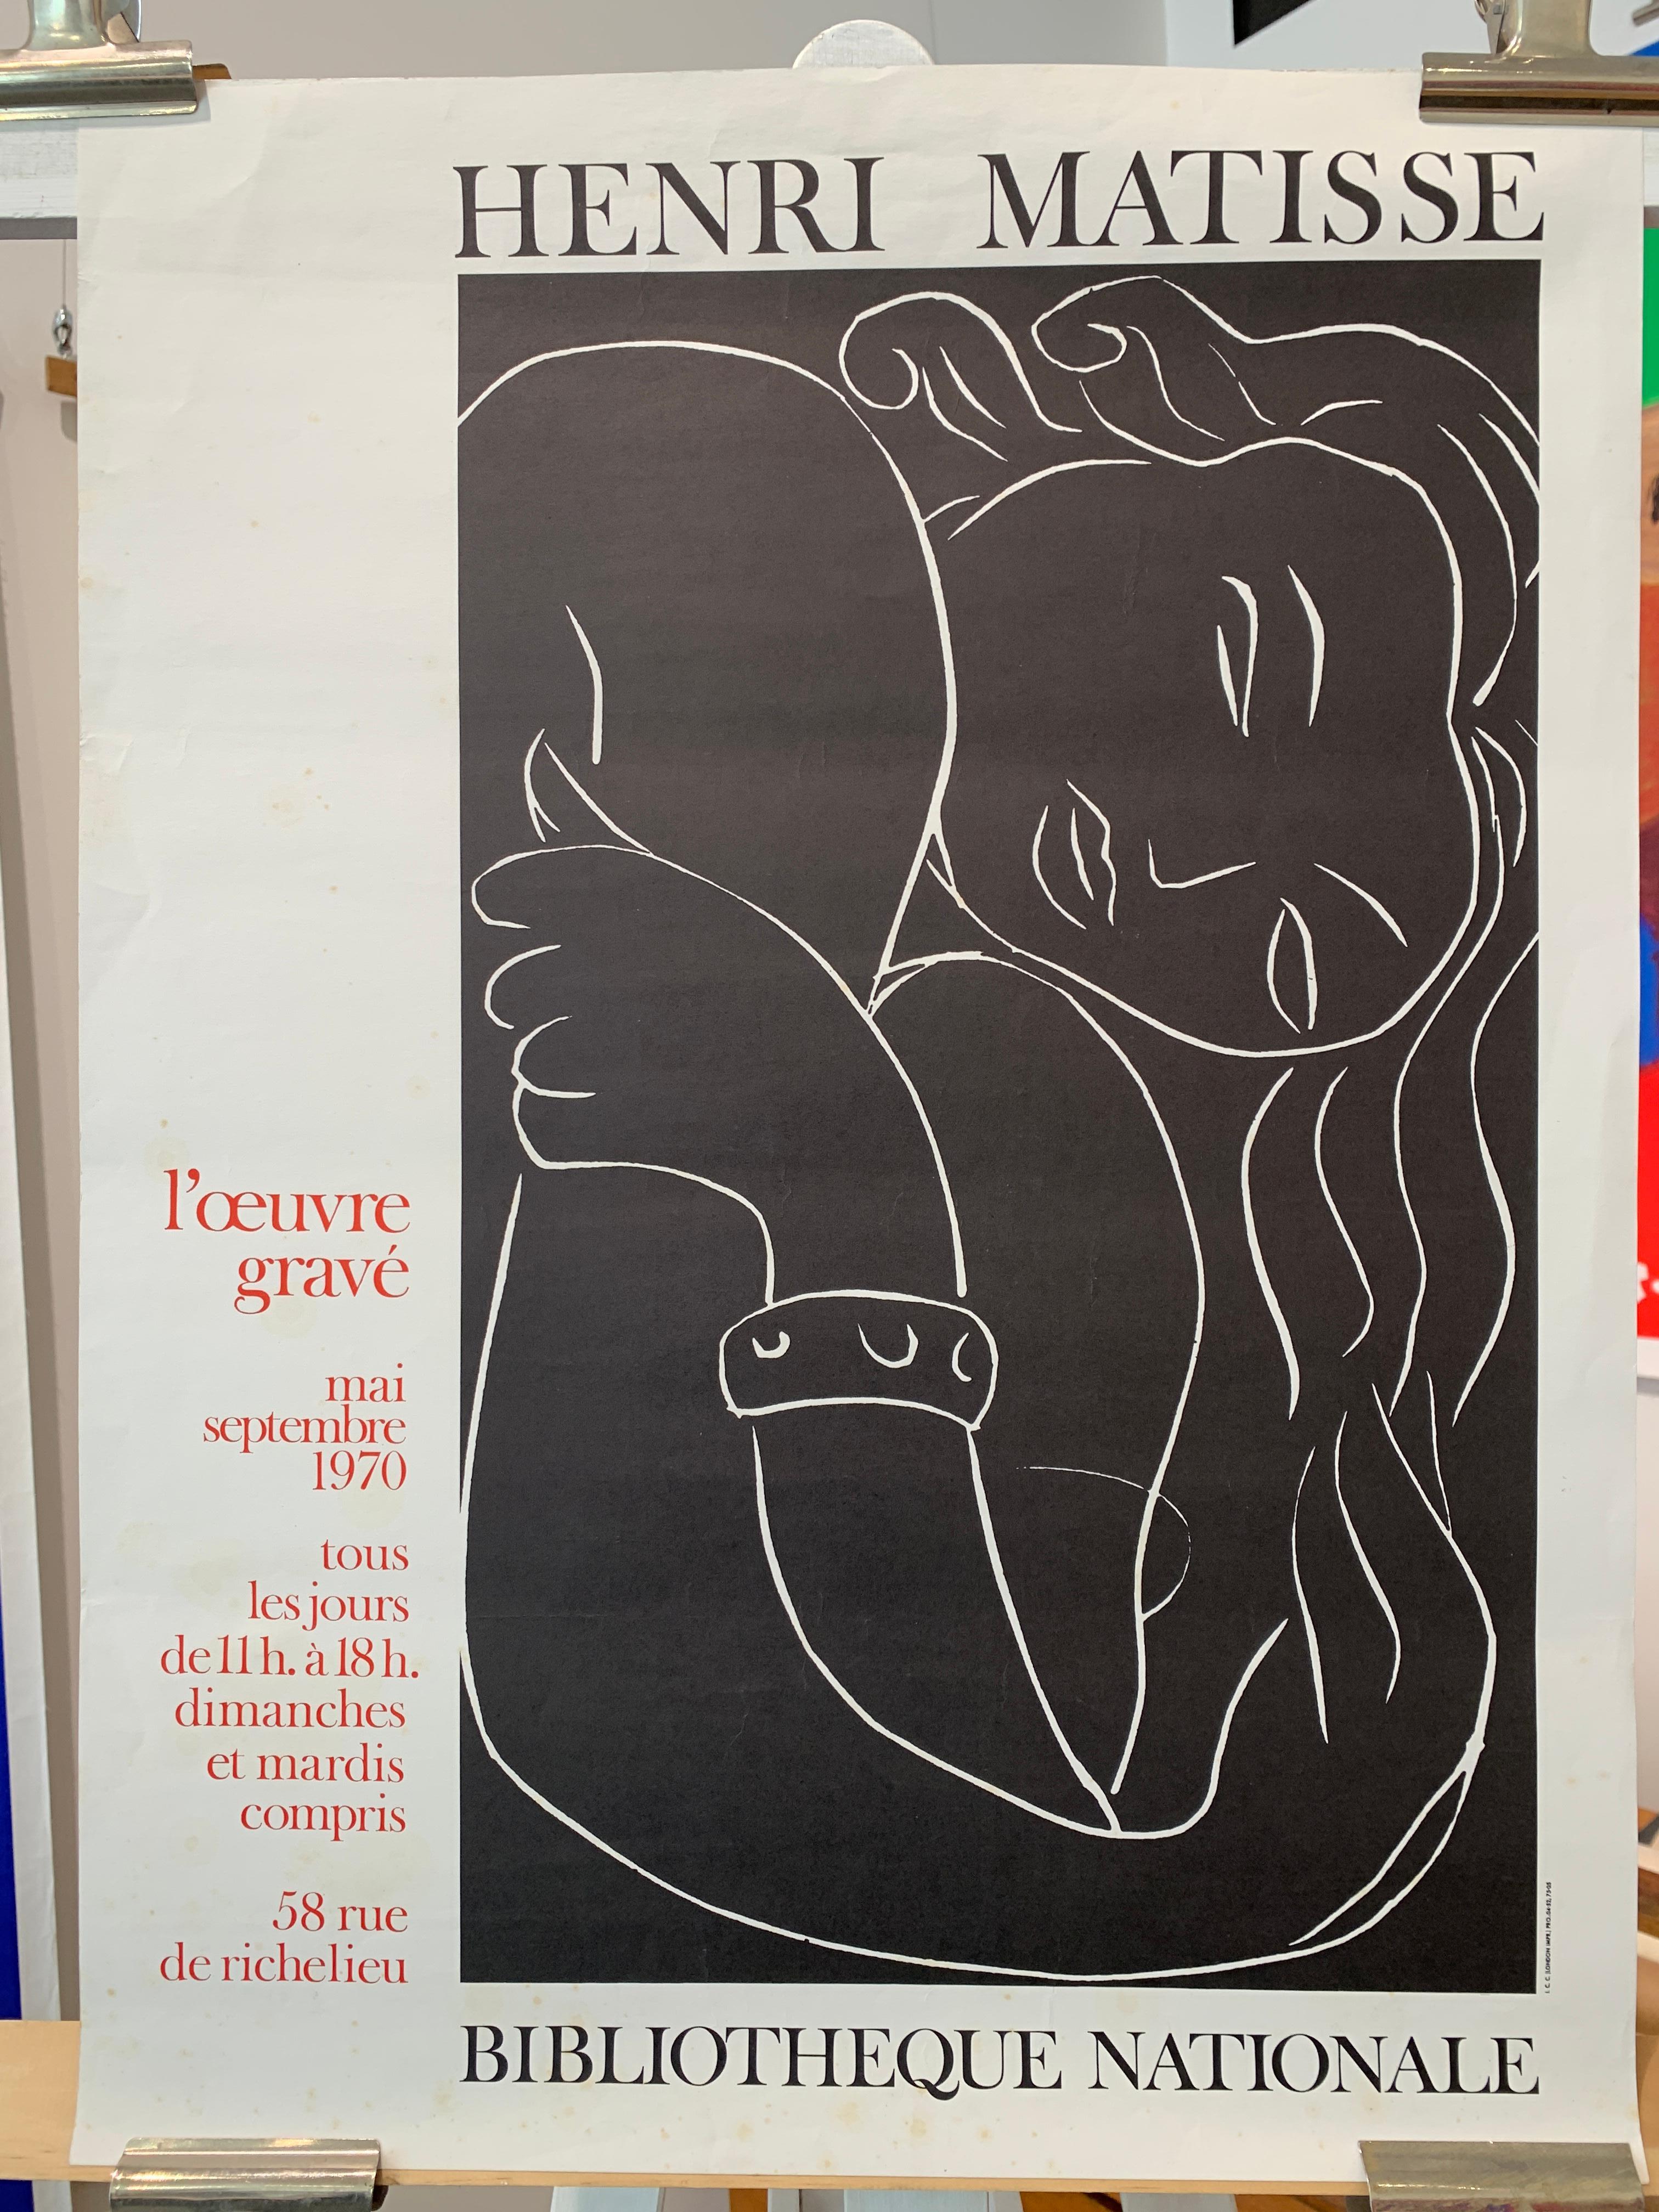 Original Vintage Exhibition Poster, Henri Matisse, 'BIBLIOTHEQUE NATIONALE' 1970

This is an original exhibition poster by Henri Matisse from 1970, the overall condition is very good. Slight signs of wear consistent to the items age.